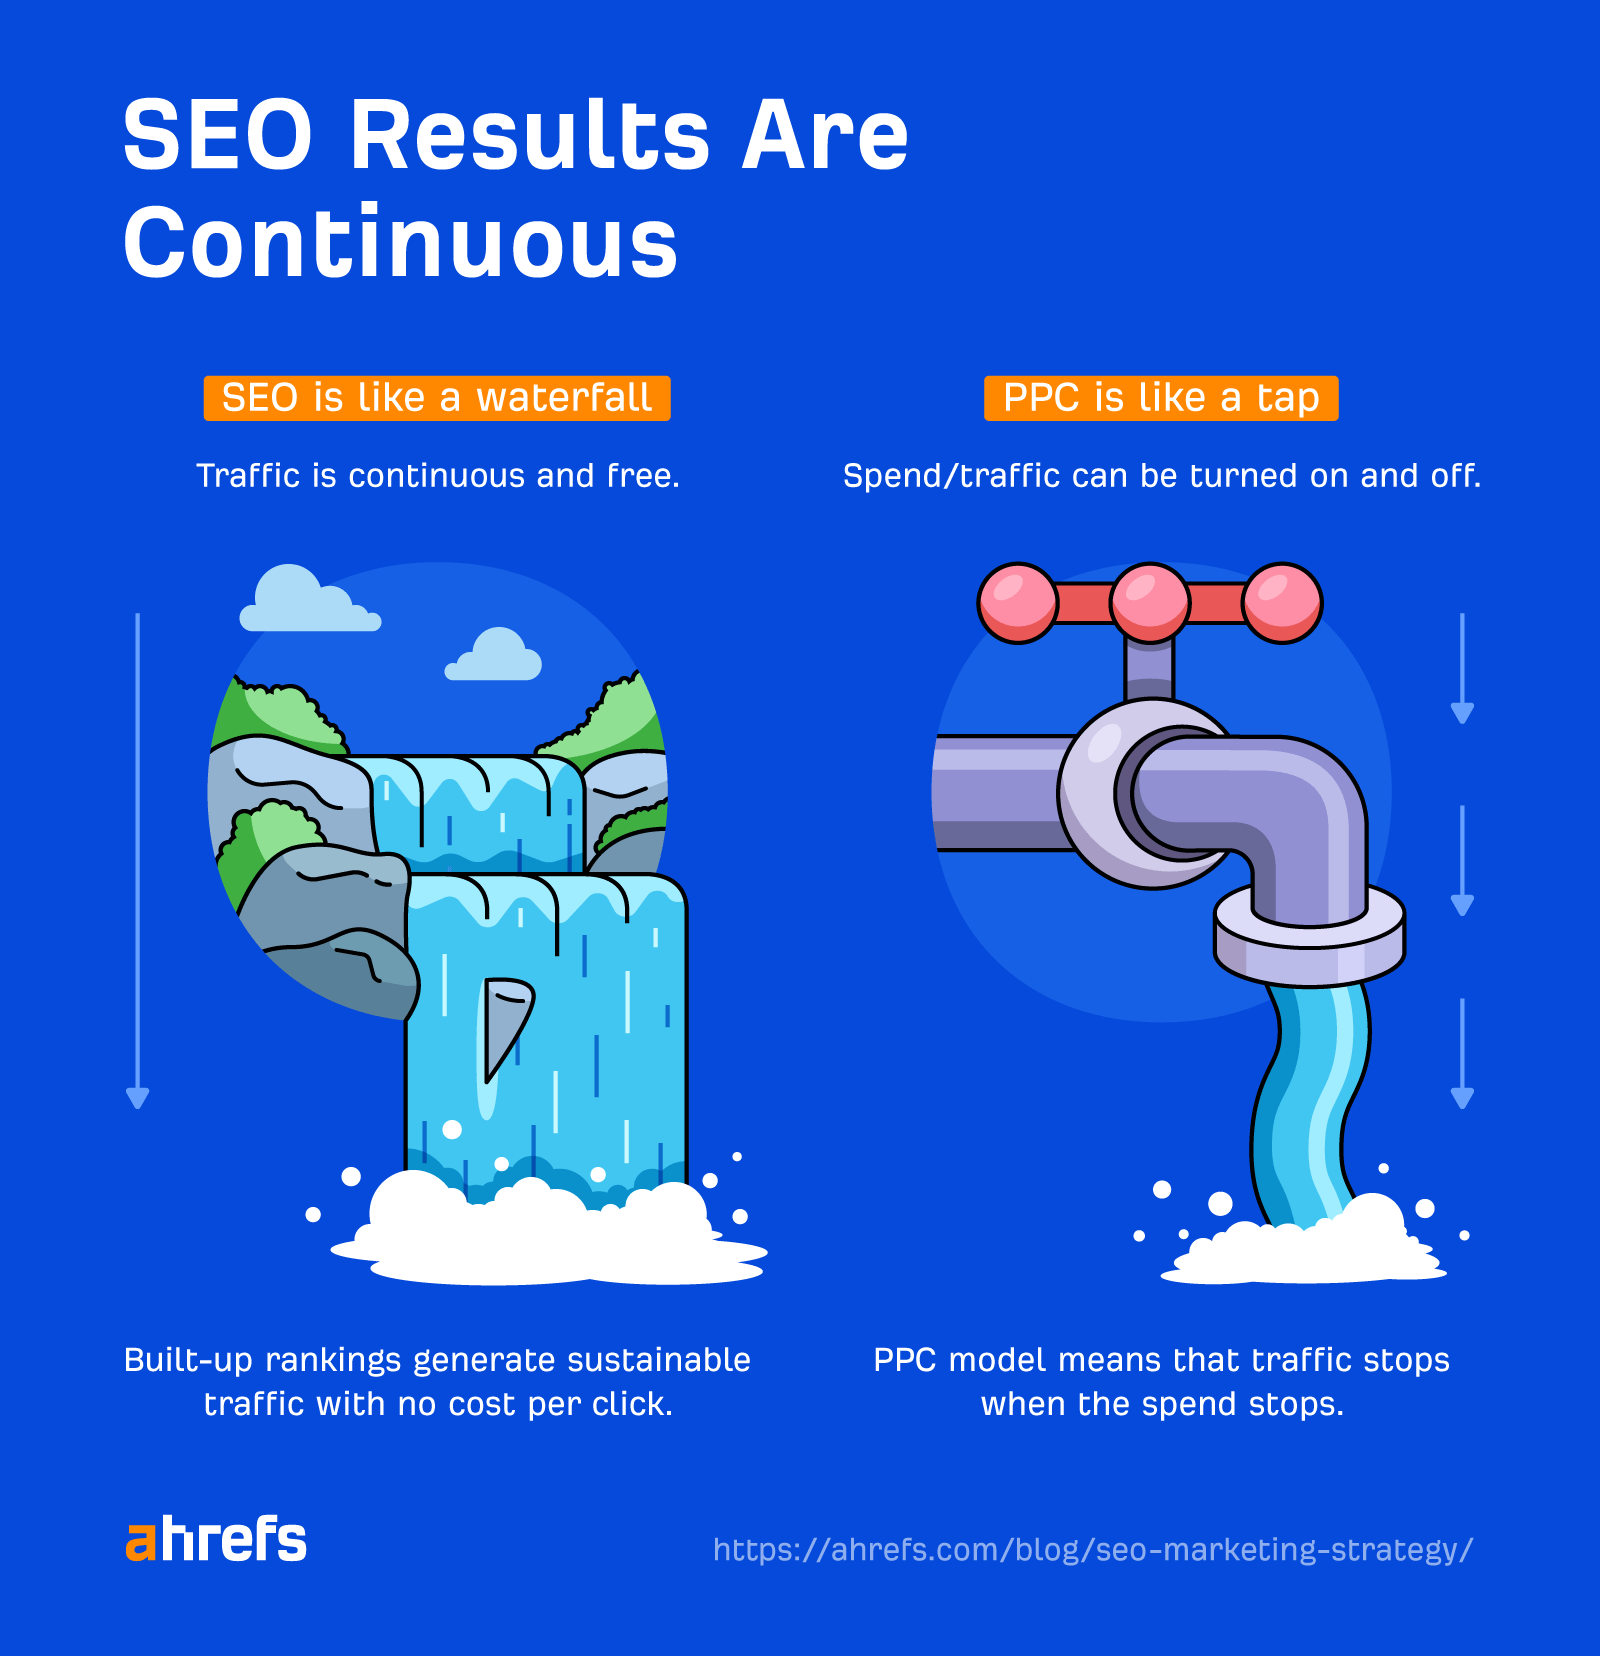 SEO results are continuous, while PPC results can be turned on and off
